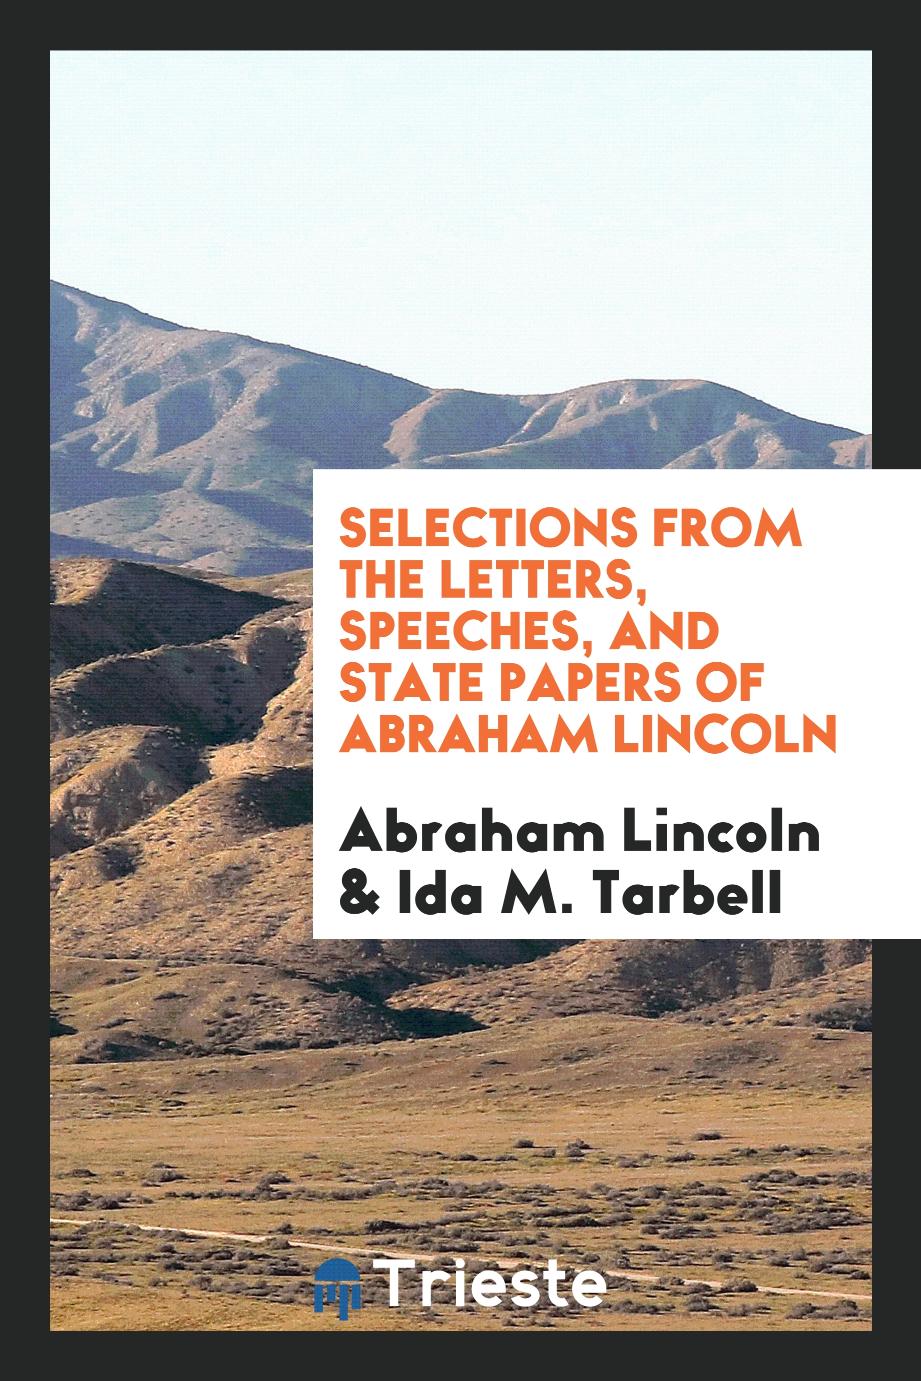 Selections from the letters, speeches, and state papers of Abraham Lincoln